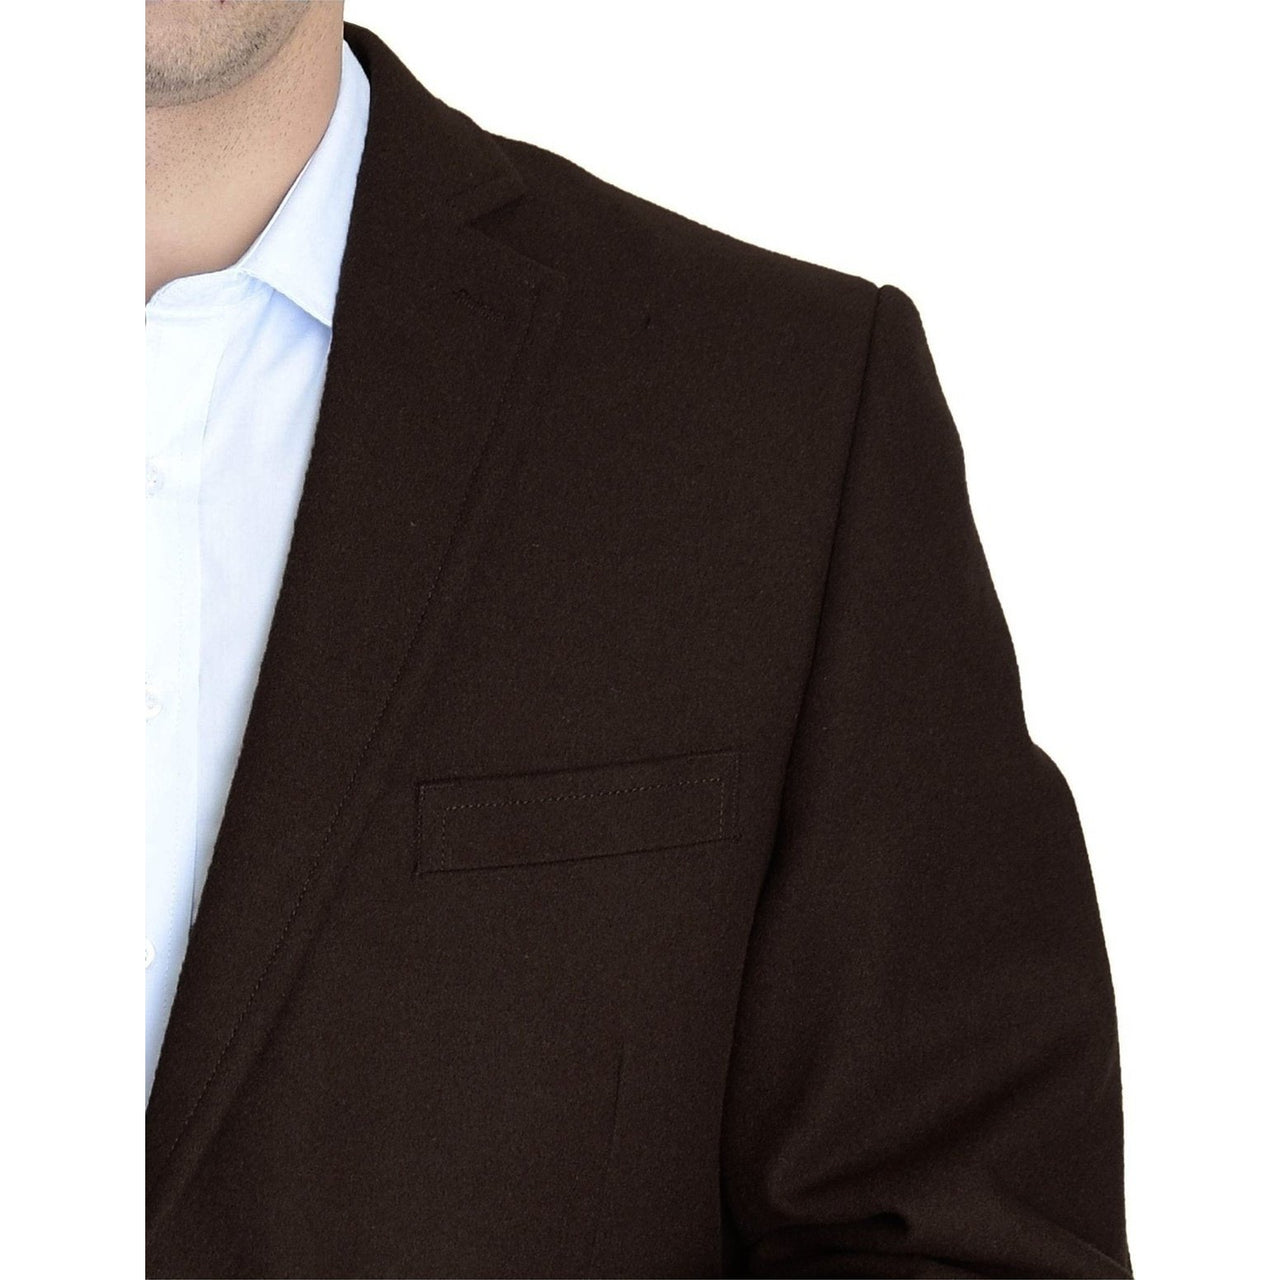 Men's Wool Cashmere Single Breasted Chocolate Brown 3/4 Length Car Coat Top Coat